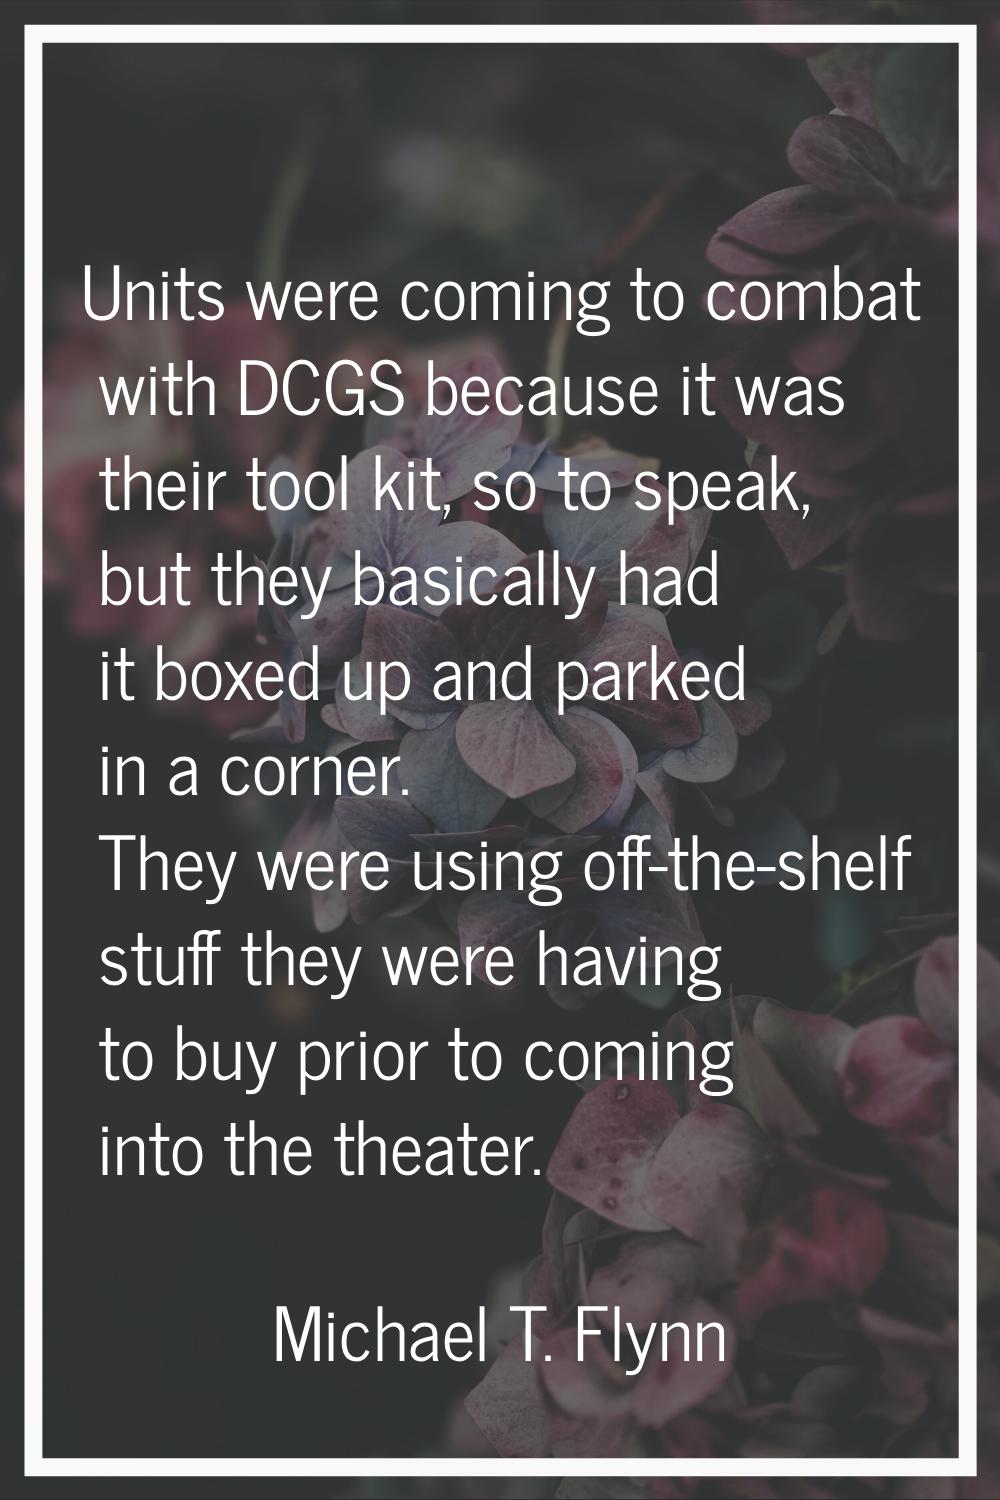 Units were coming to combat with DCGS because it was their tool kit, so to speak, but they basicall